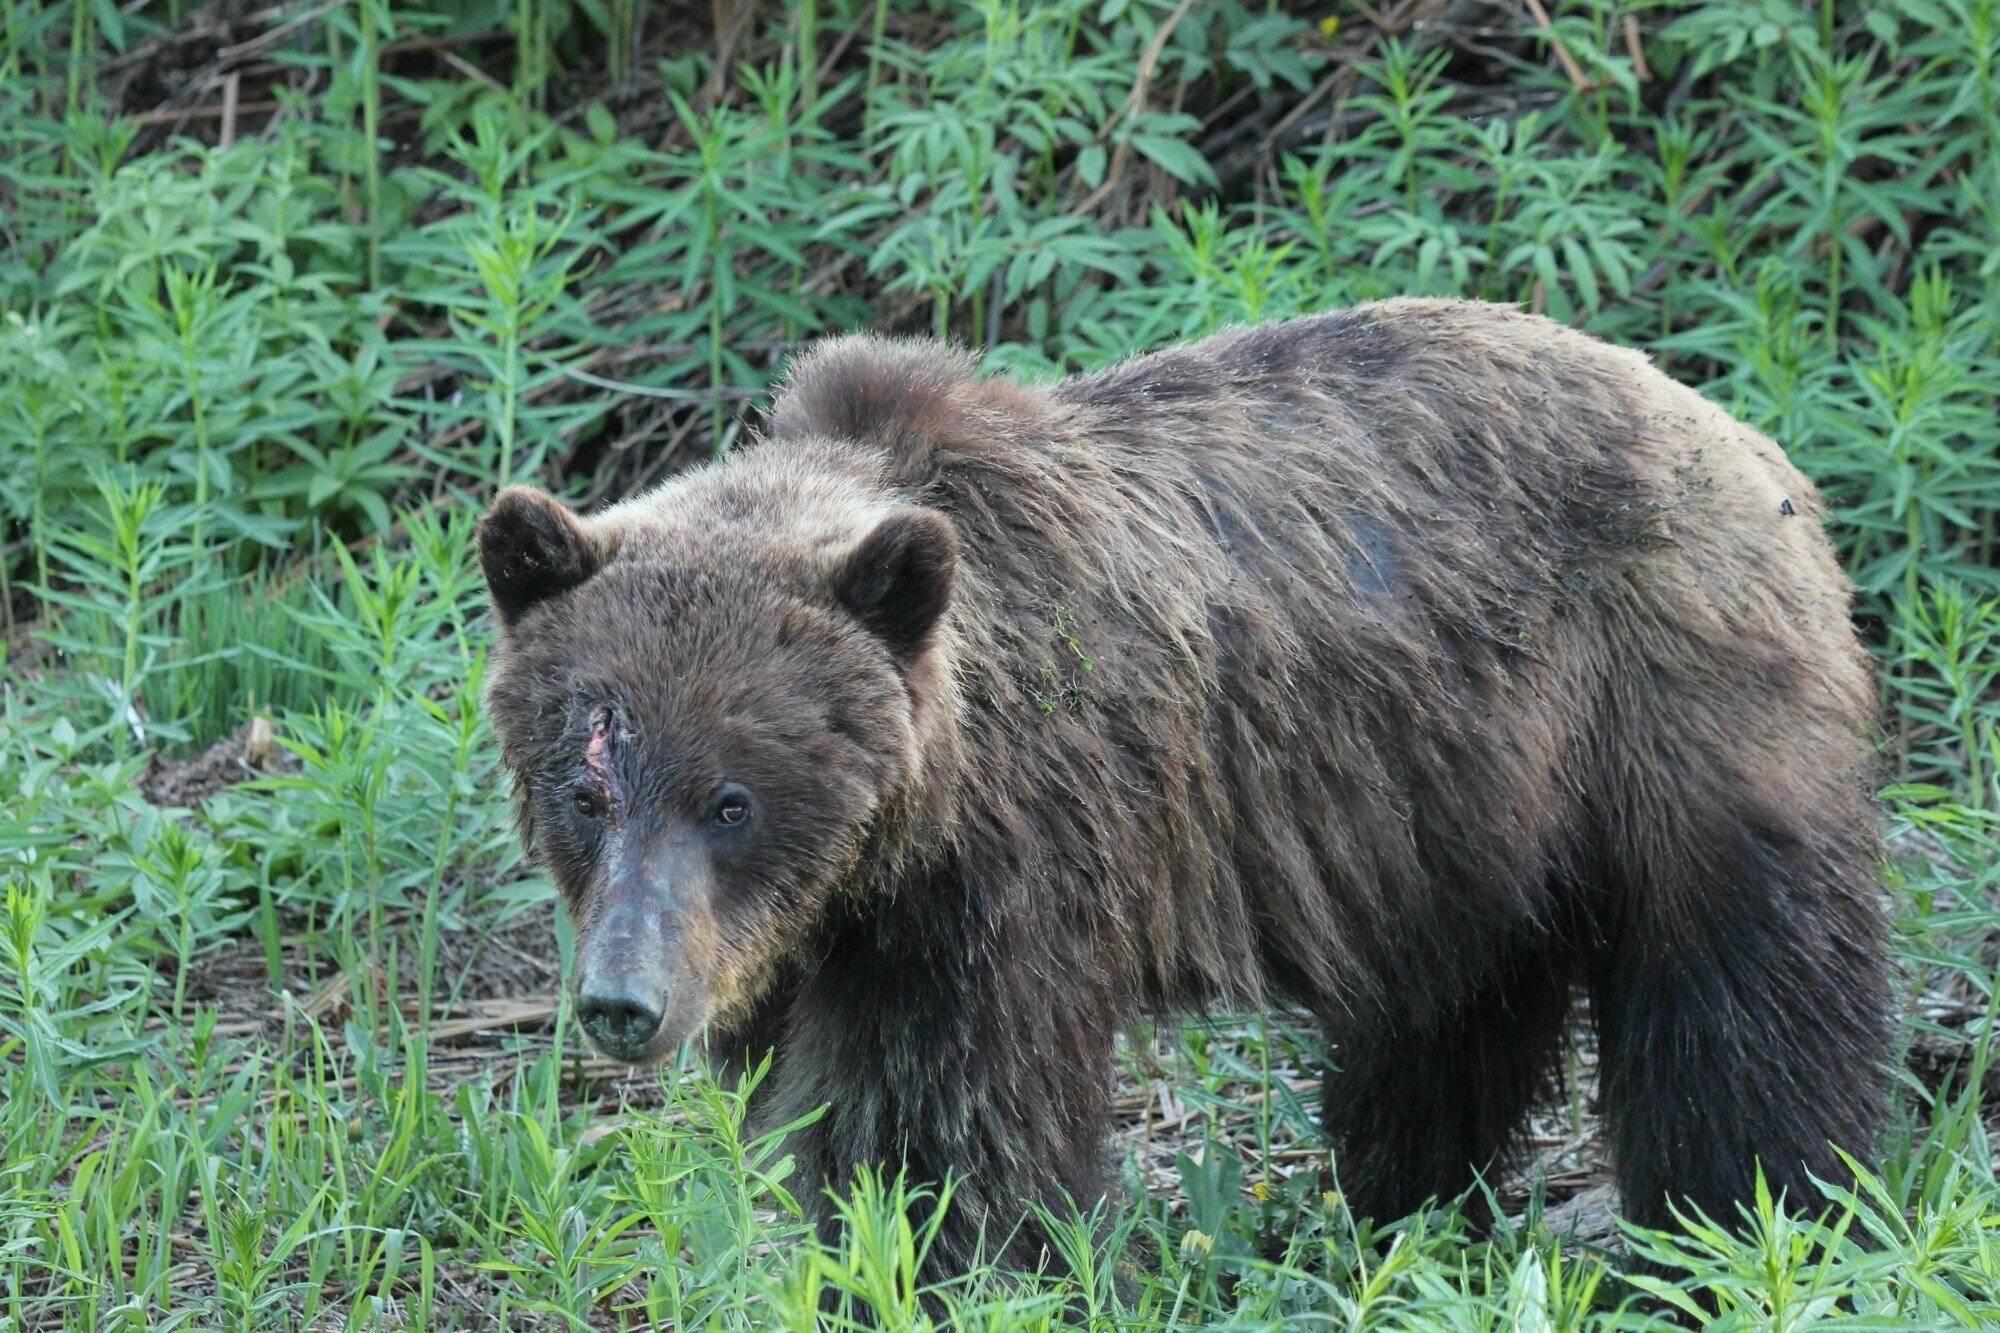 A Grizzly Bear with a broken-off arrow stuck in its head, was recently taken by a passing motorist and provided to Smithers Conservation Officers. The picture was taken along Hwy. 37 North, just north of the Meziadin junction. (Conservation Officer Service photo)